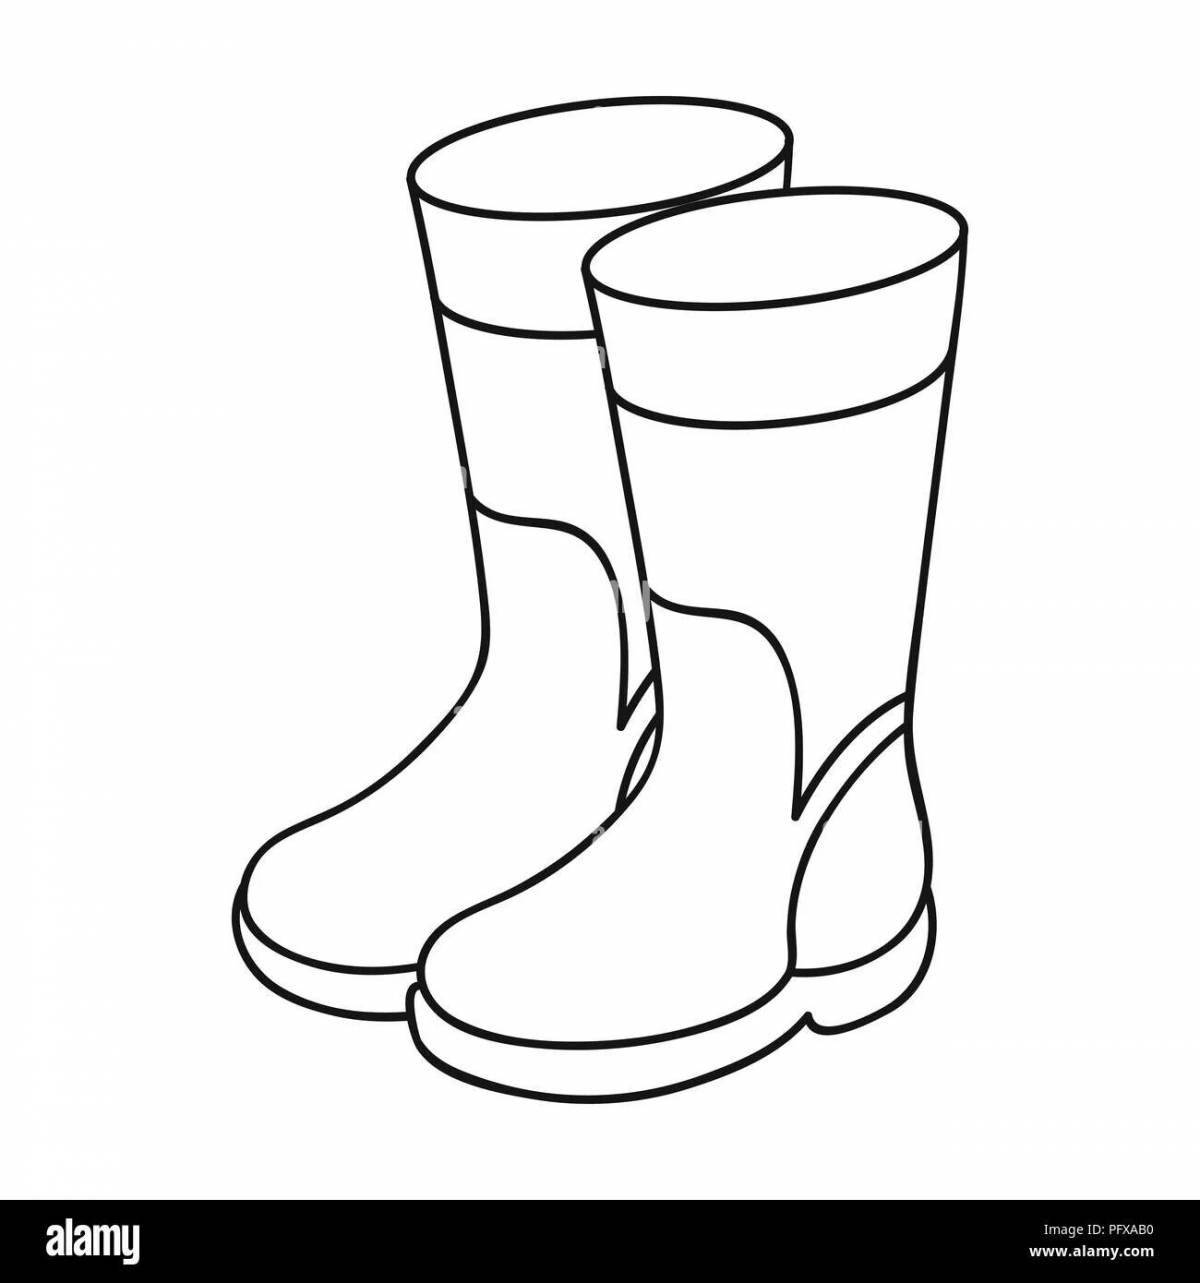 Playful rubber boots coloring page